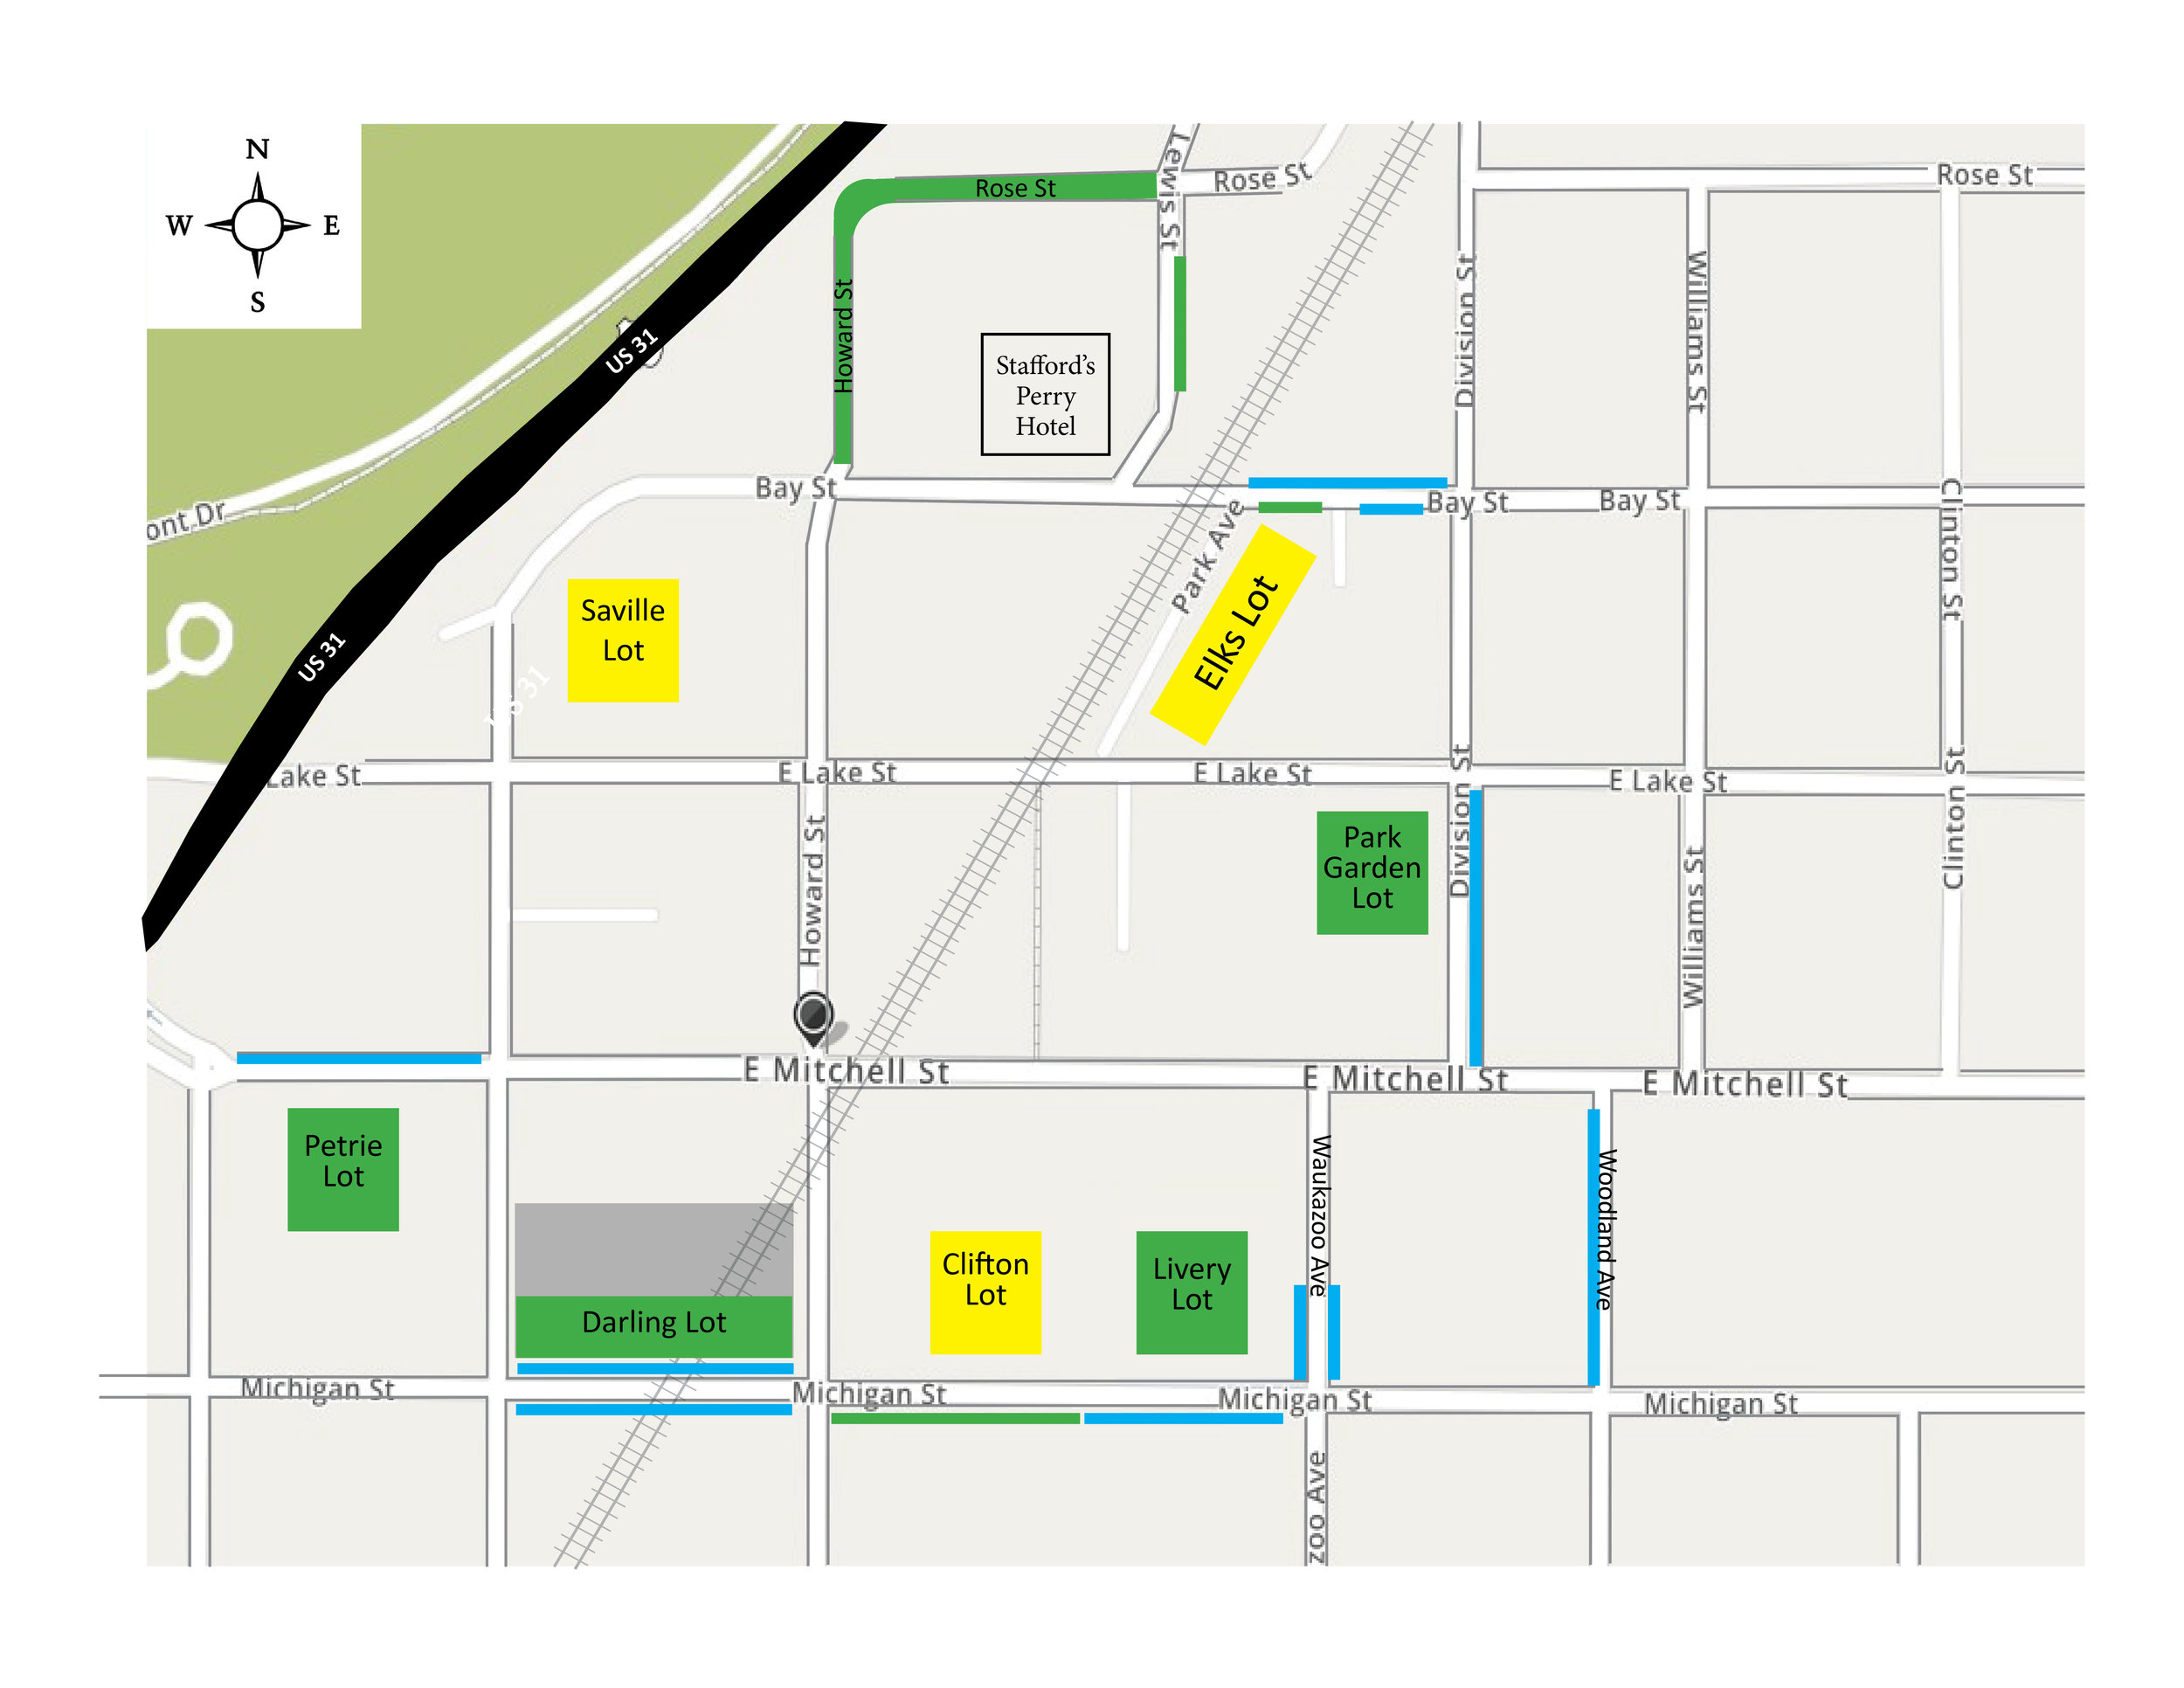 Tiered parking permit map. Map shows yellow, green, and blue permit spaces.